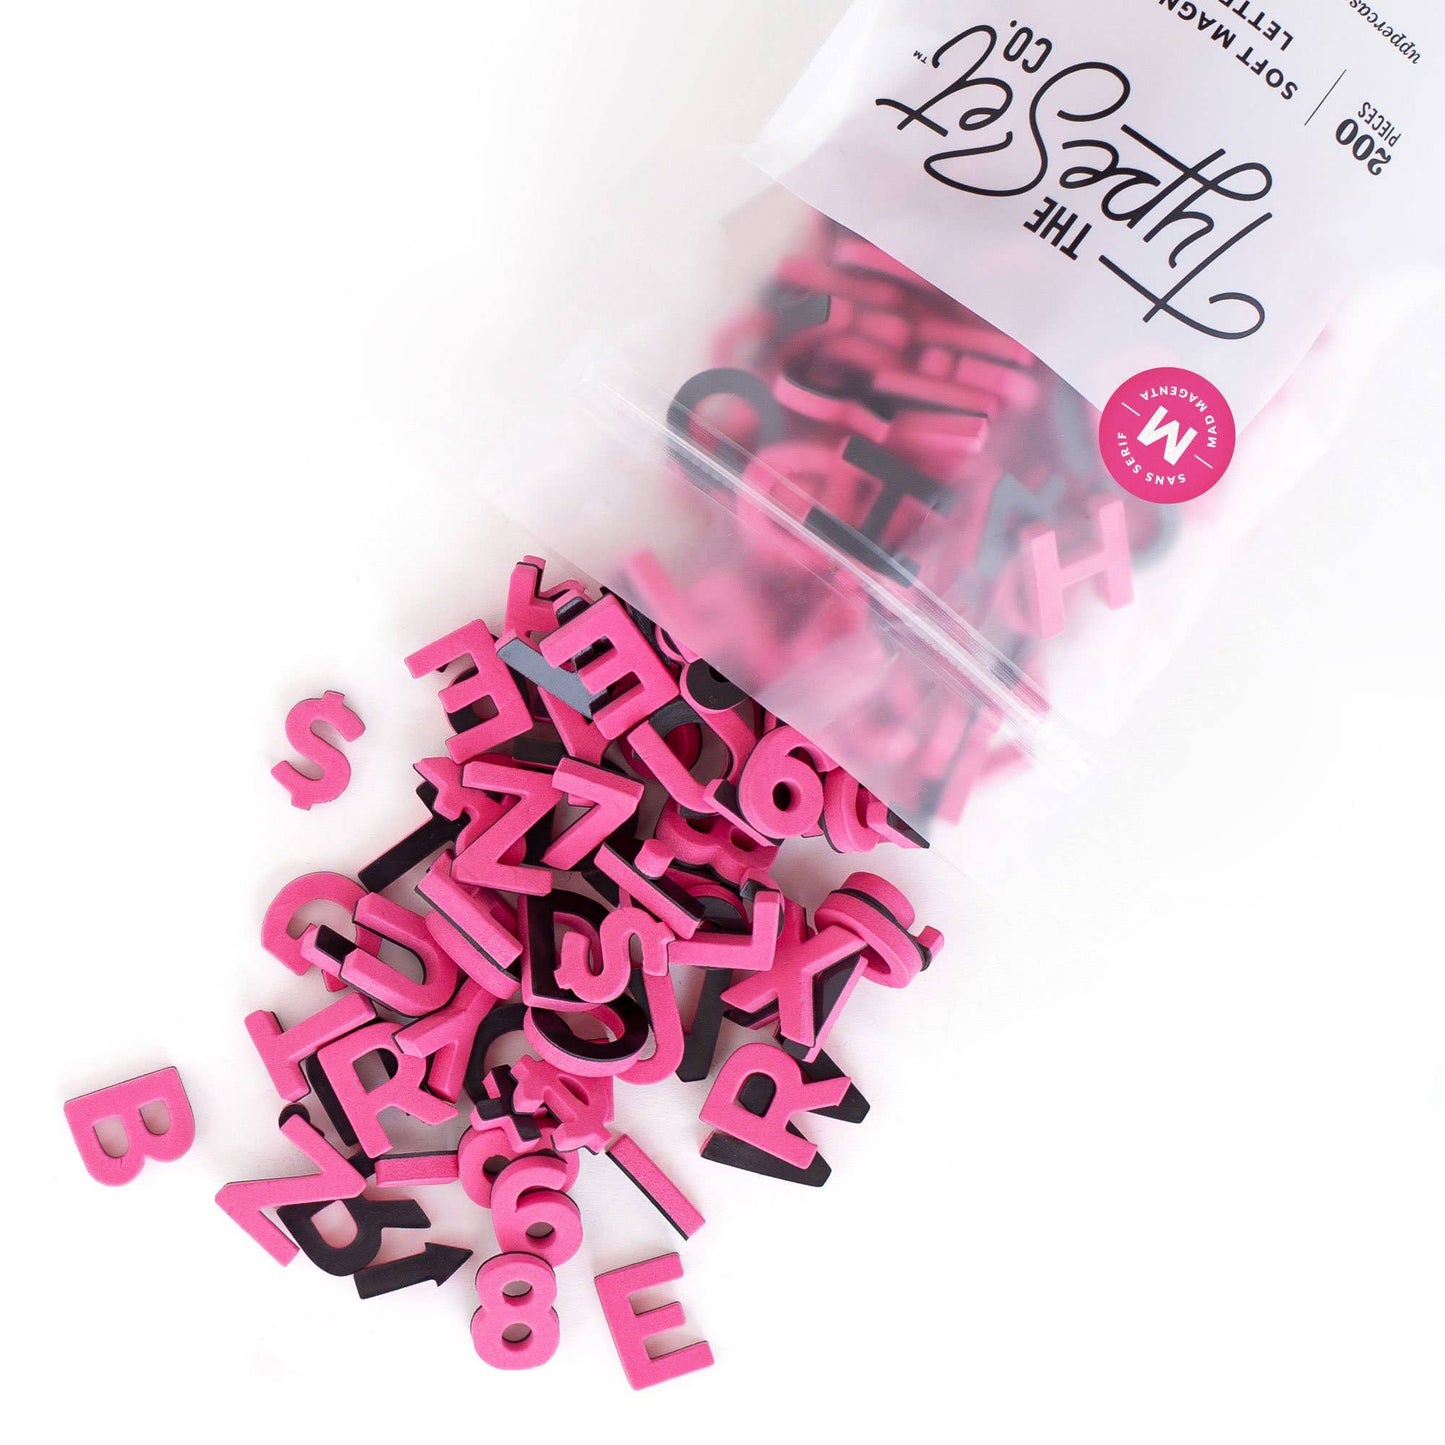 Mad Magenta Type Set Solid-Colored 200pcs 1-inch Magnetic Letters